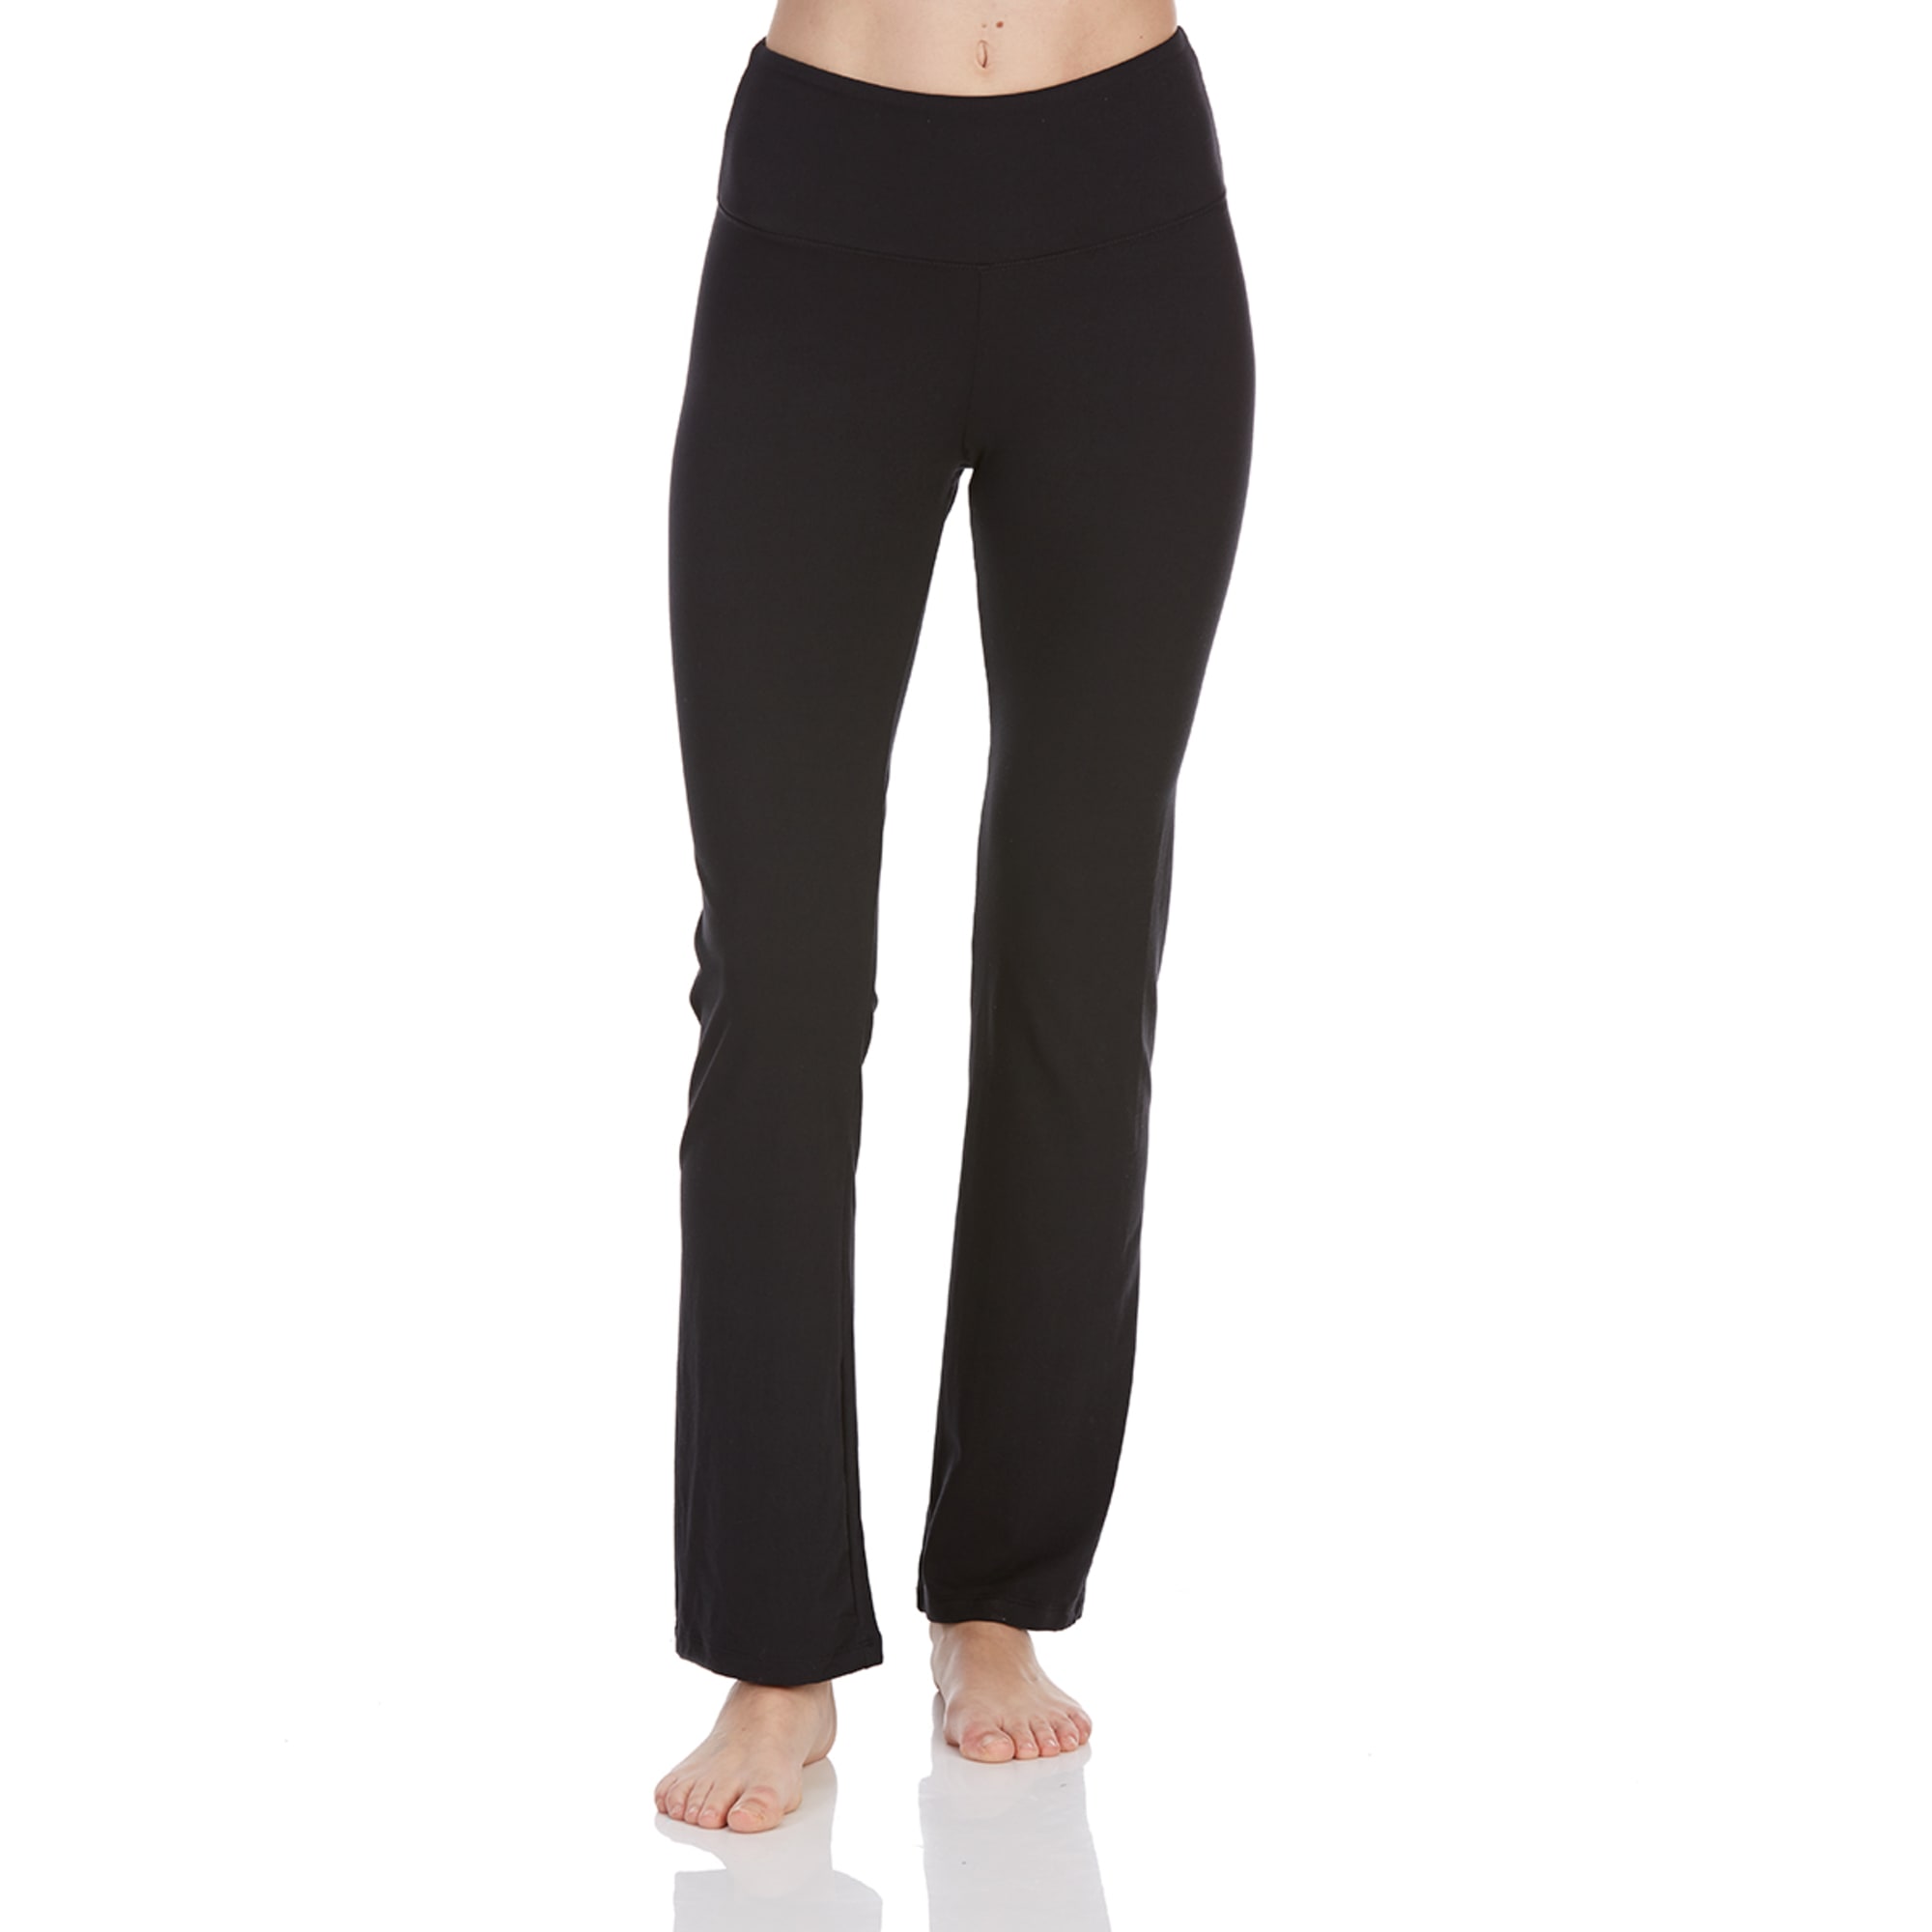 BALLY TOTAL FITNESS Women's Barely Flare Yoga Pants